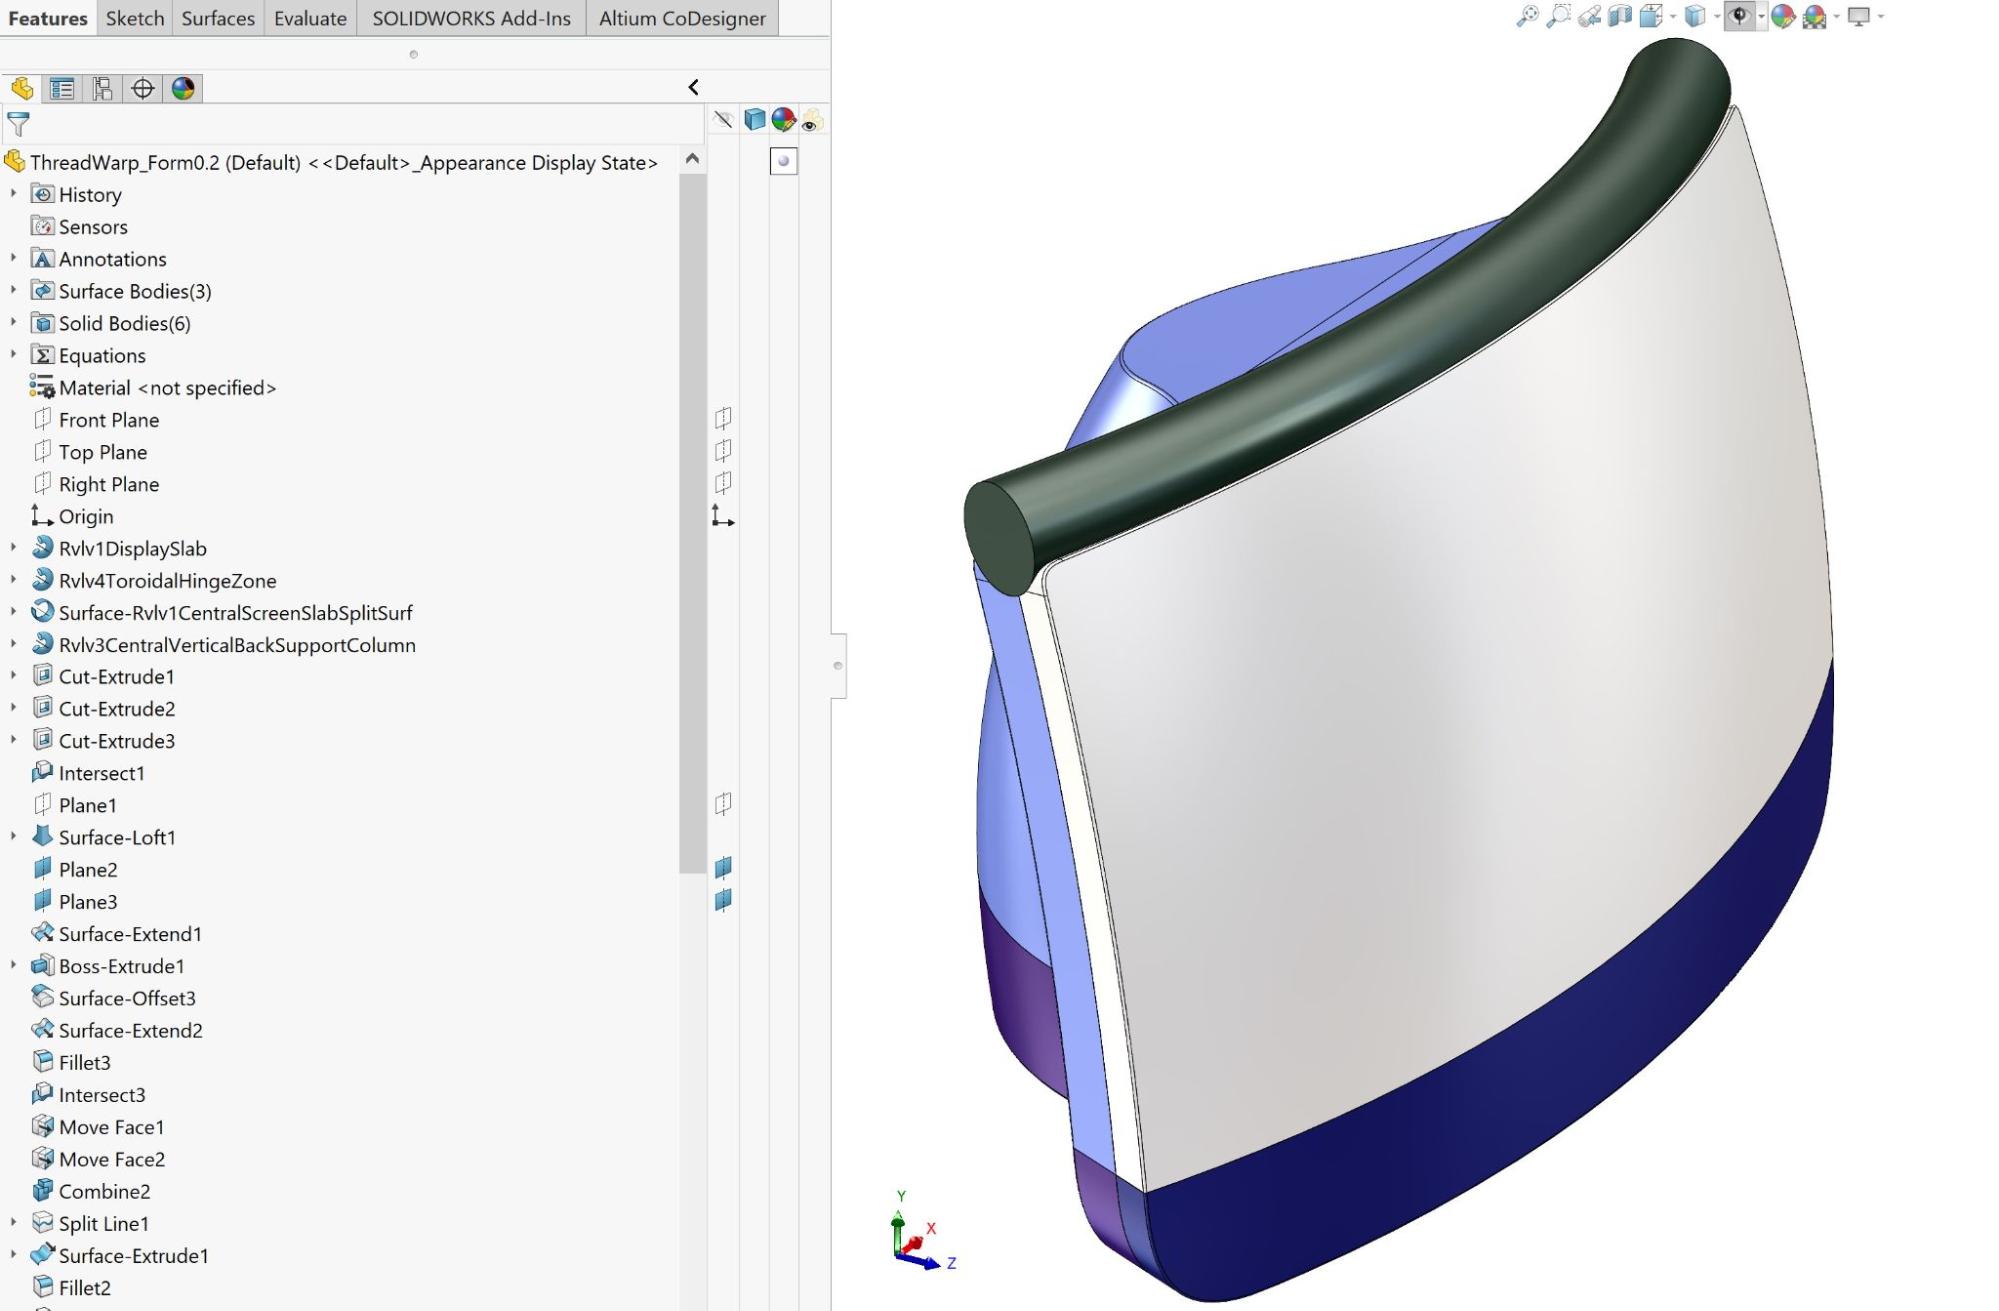 A sample of how files can be organized in a master modeling workflow within Solidworks.